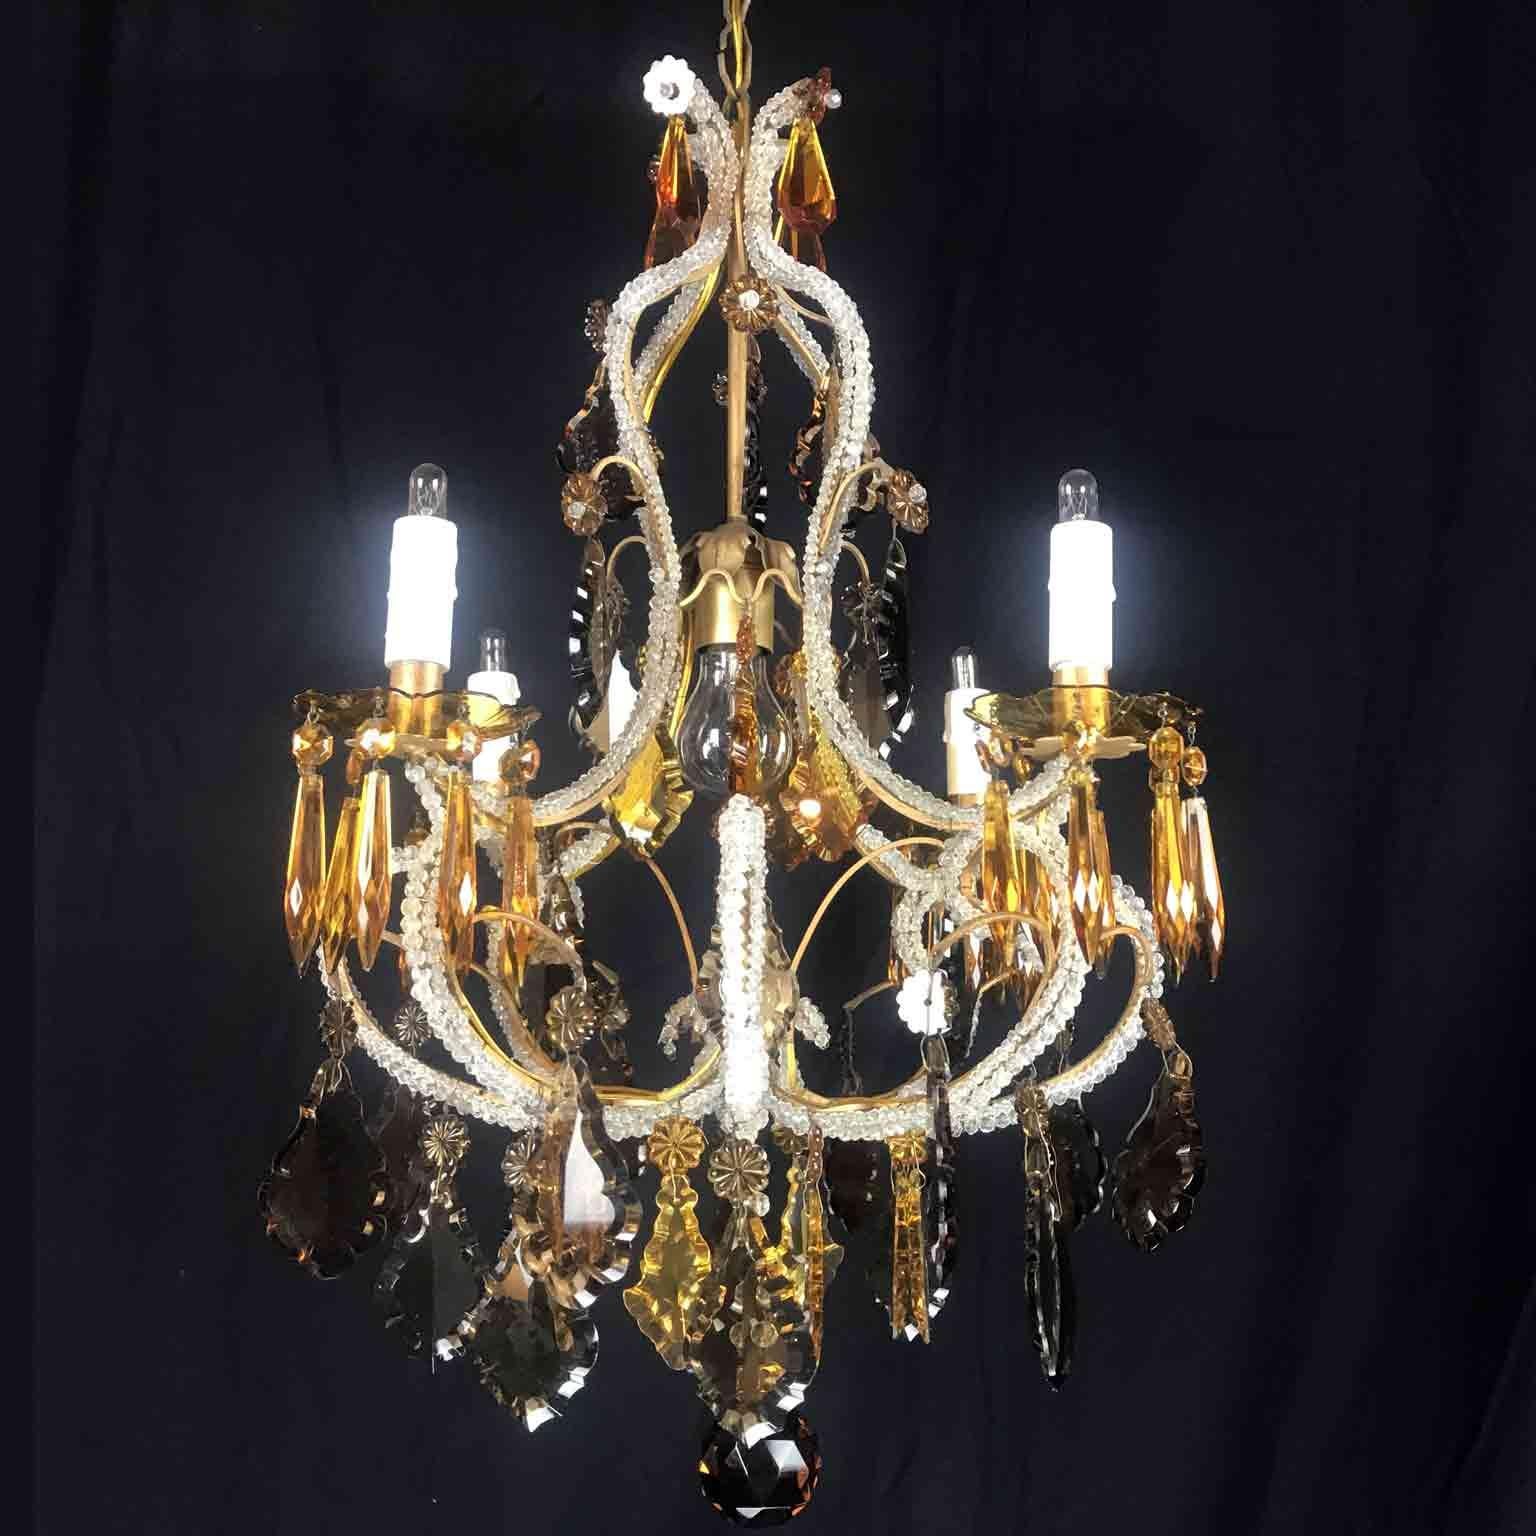 20th century Italian beaded crystal five-light chandelier, a small cage chandelier realized with squared section iron structure, with gilt finish, in good condition, ready to hang. Fully dressed with warm amber yellow and grey color pendants,